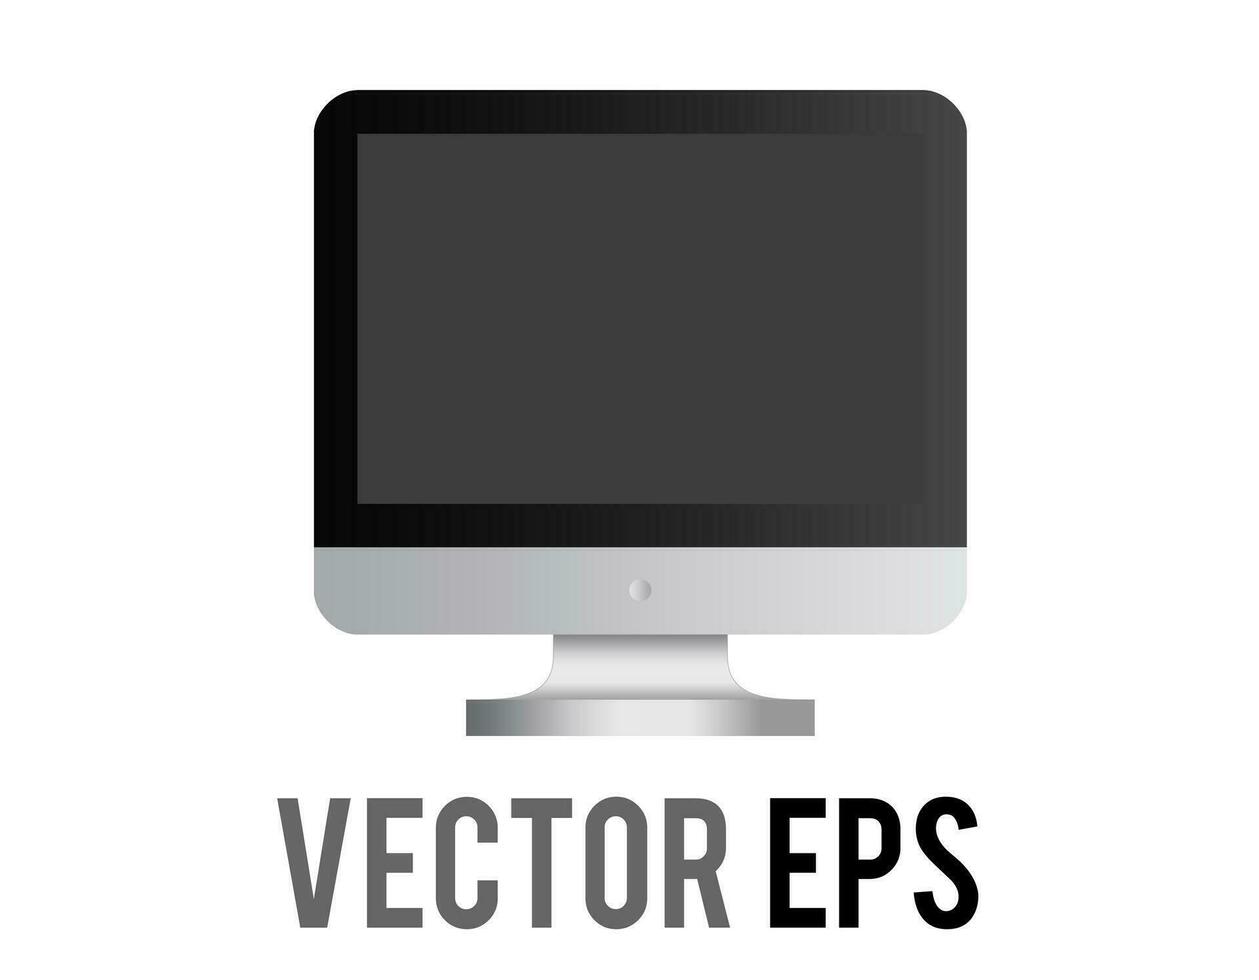 Vector black and silver desktop personal computer icon in front view